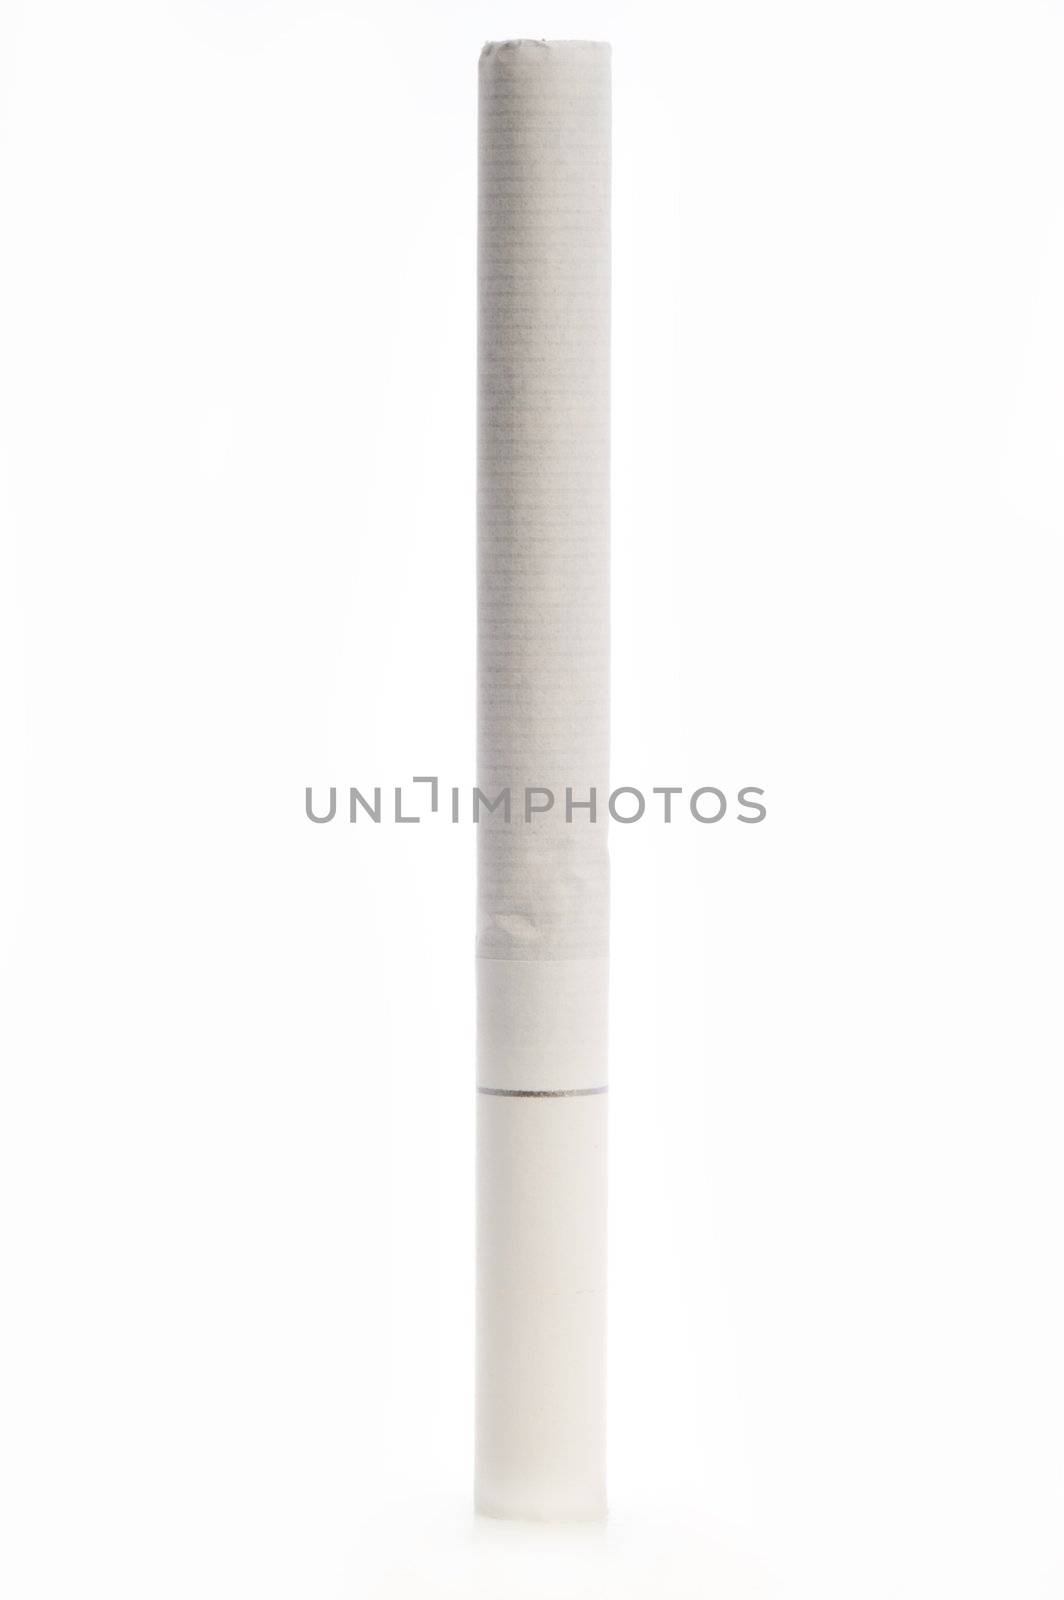 Cigarette filter with a white on white by kosmsos111